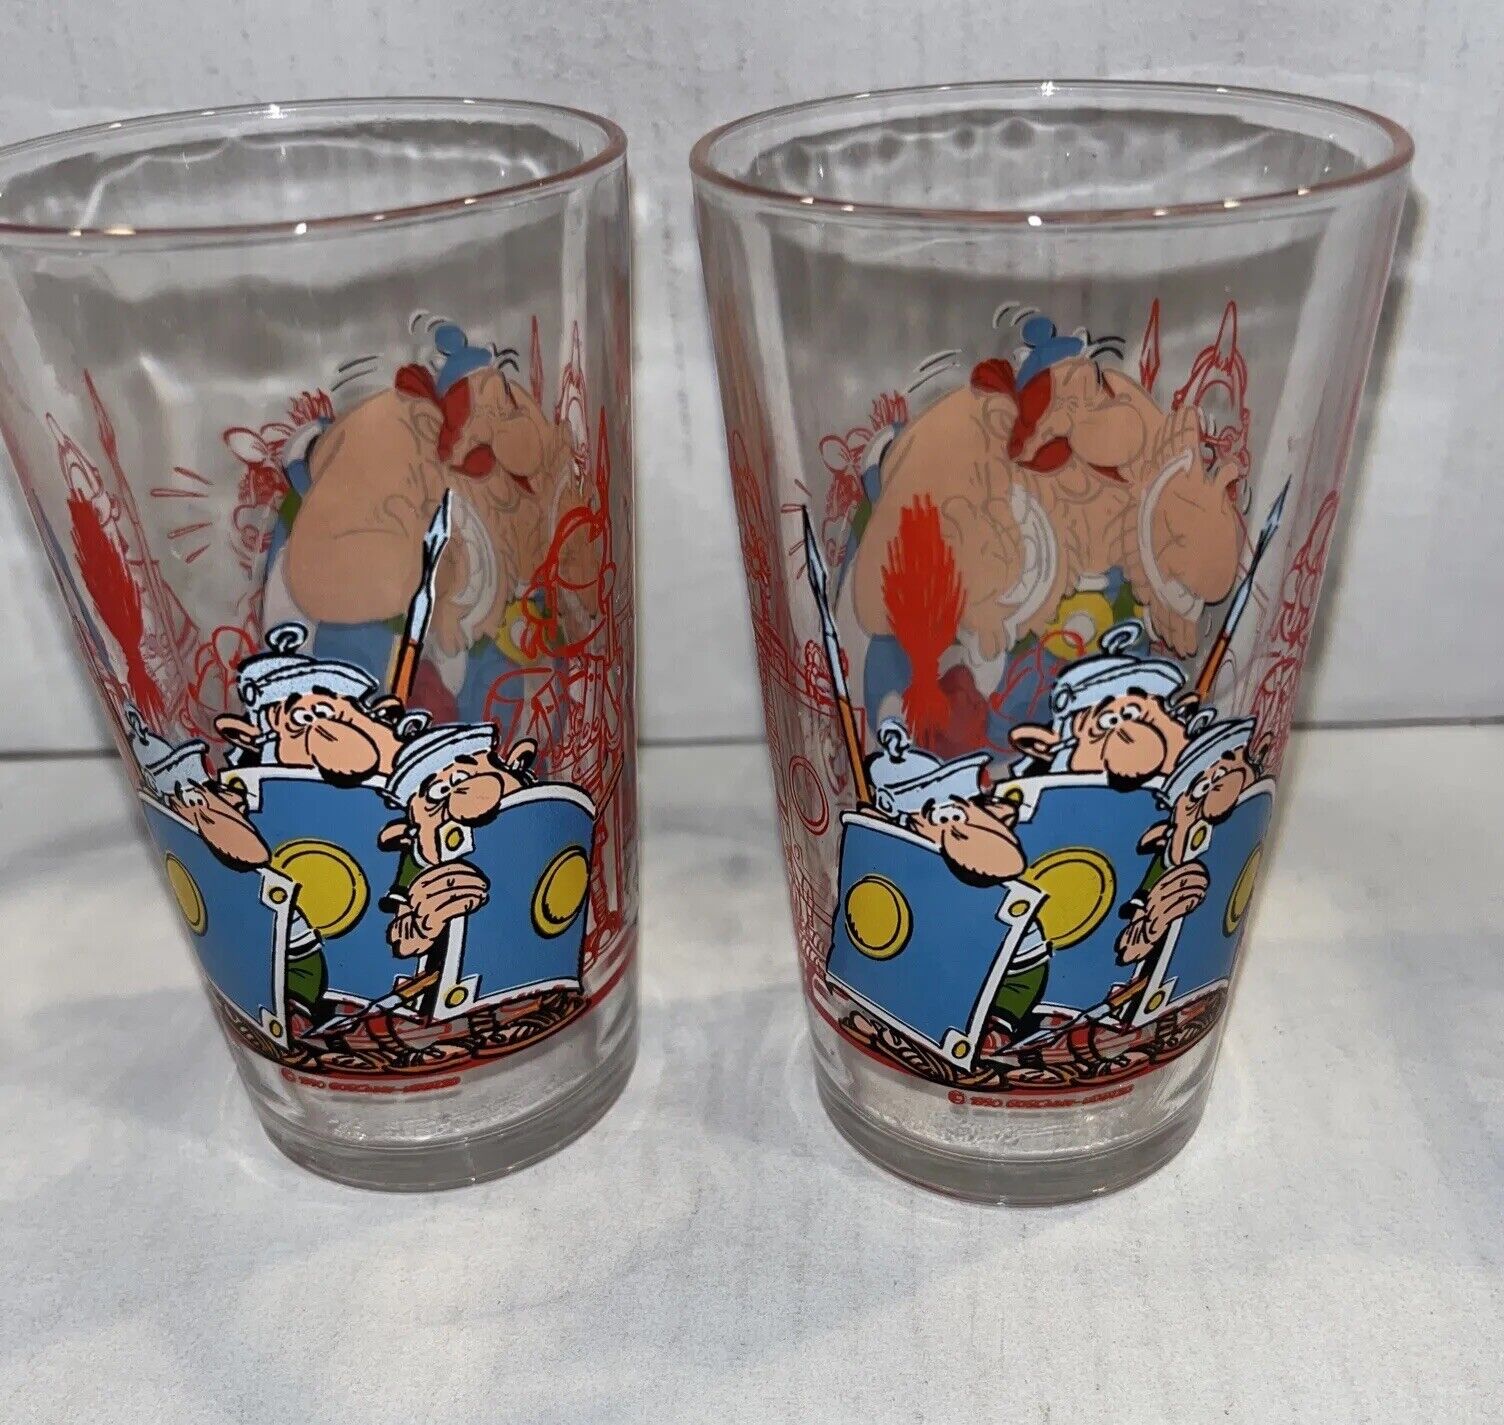 Asterix Obelix Idefix and soldiers Glasses 1990 FRANCE Set Of 2